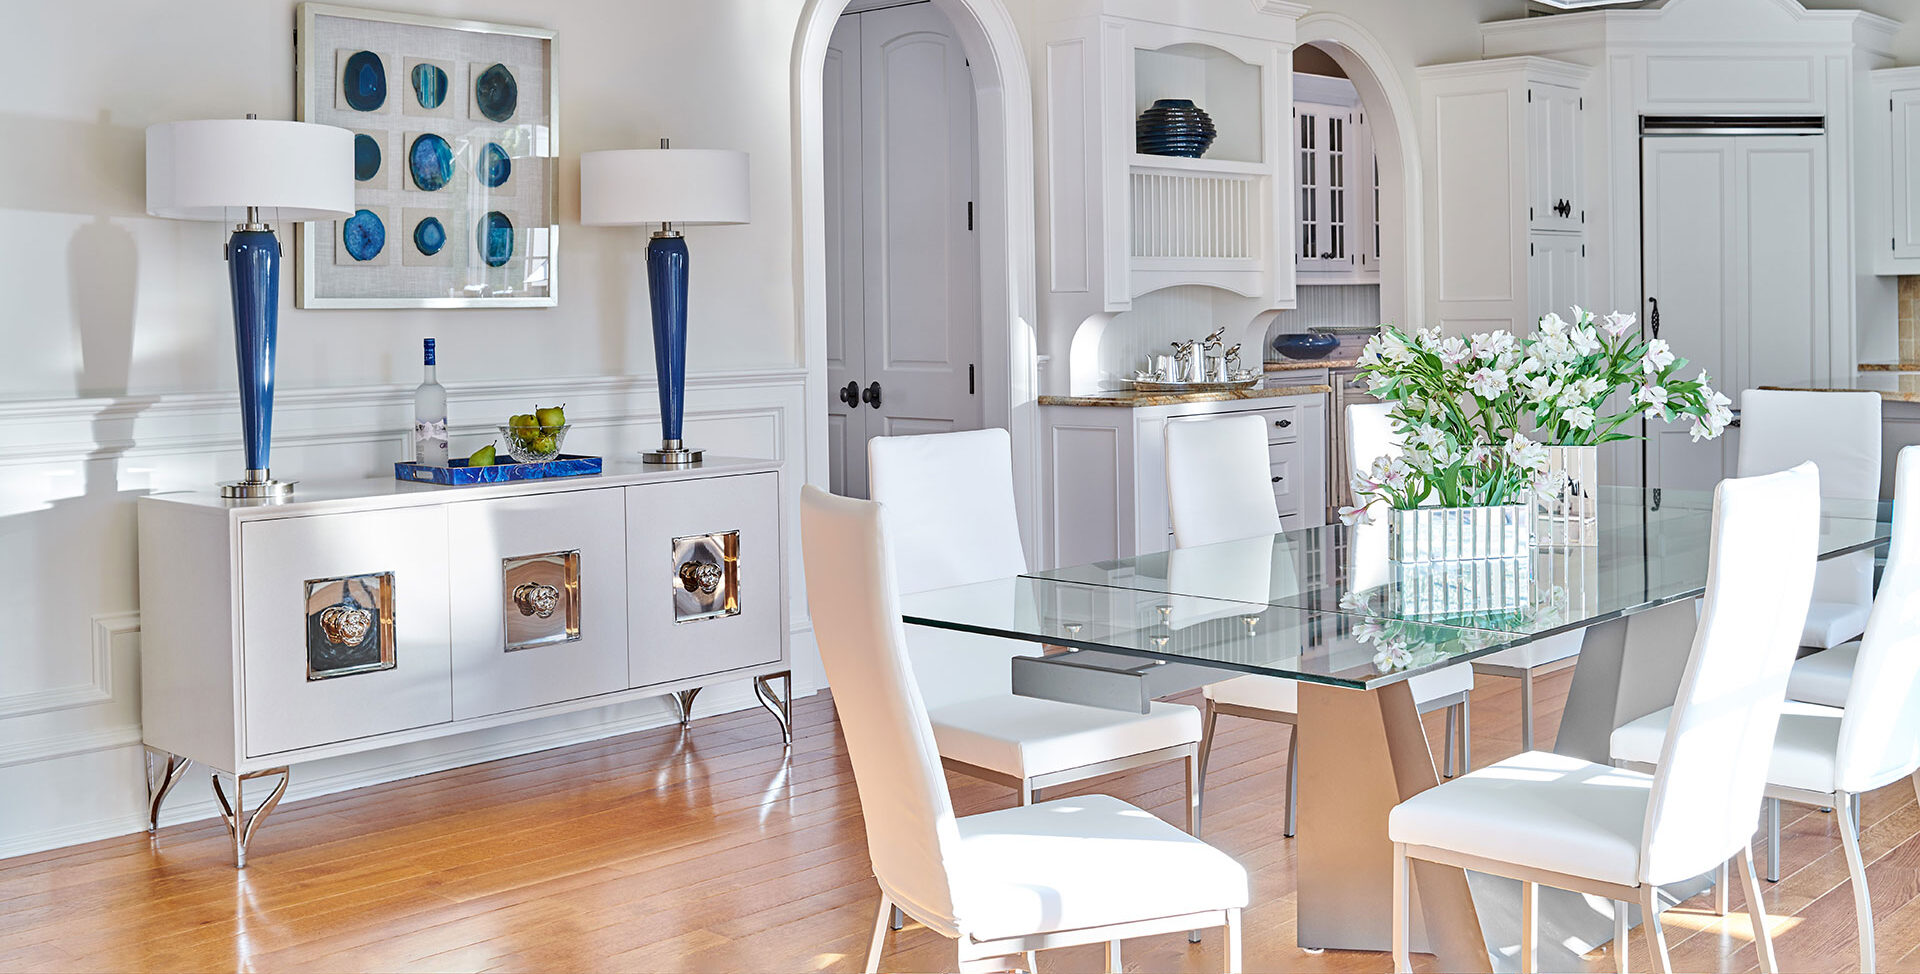 5 simple yet creative ways to elevate your dining space